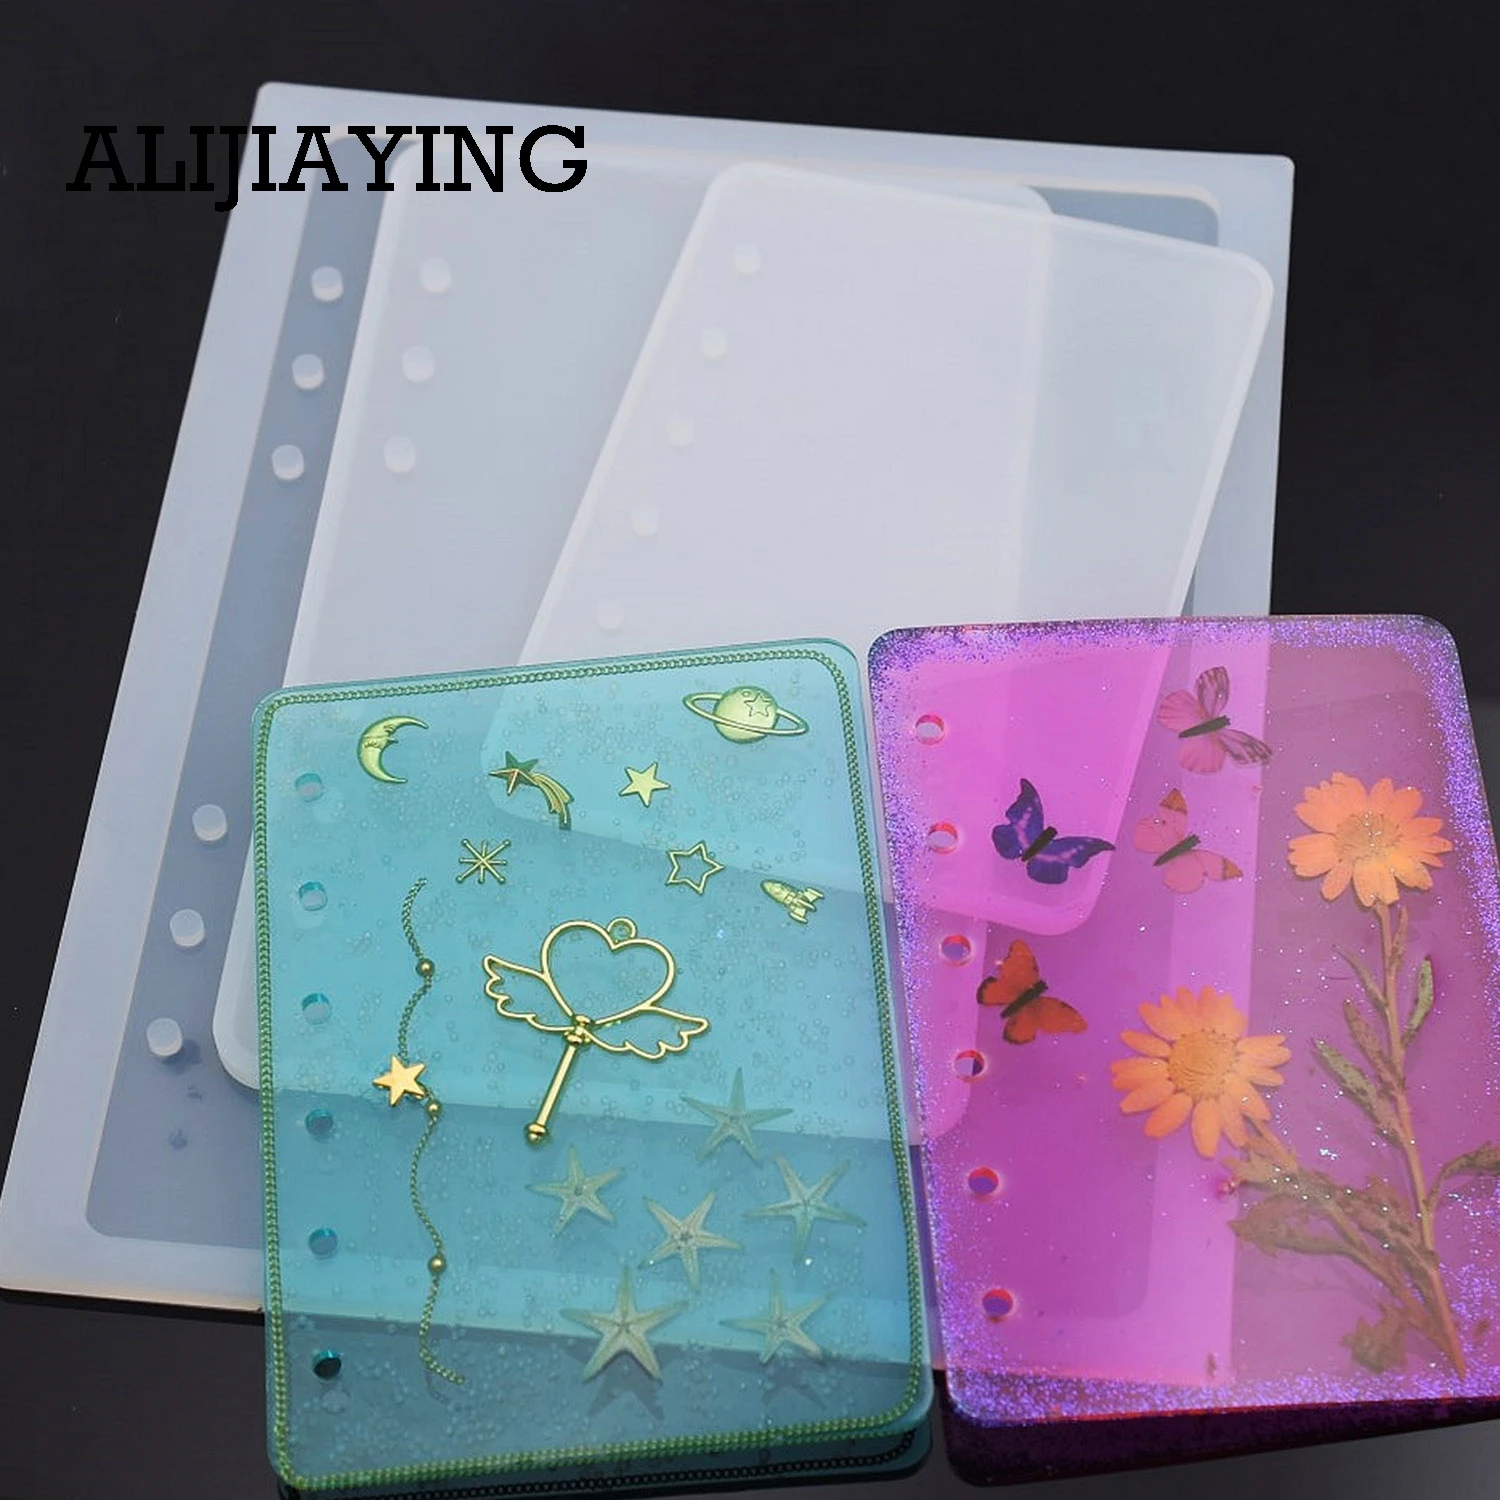 M0011 Silicone Mold DIY Crafts Notebook Shaped A5 A6 A7 Mirror Jewelry Making Book Resin Craft Molds